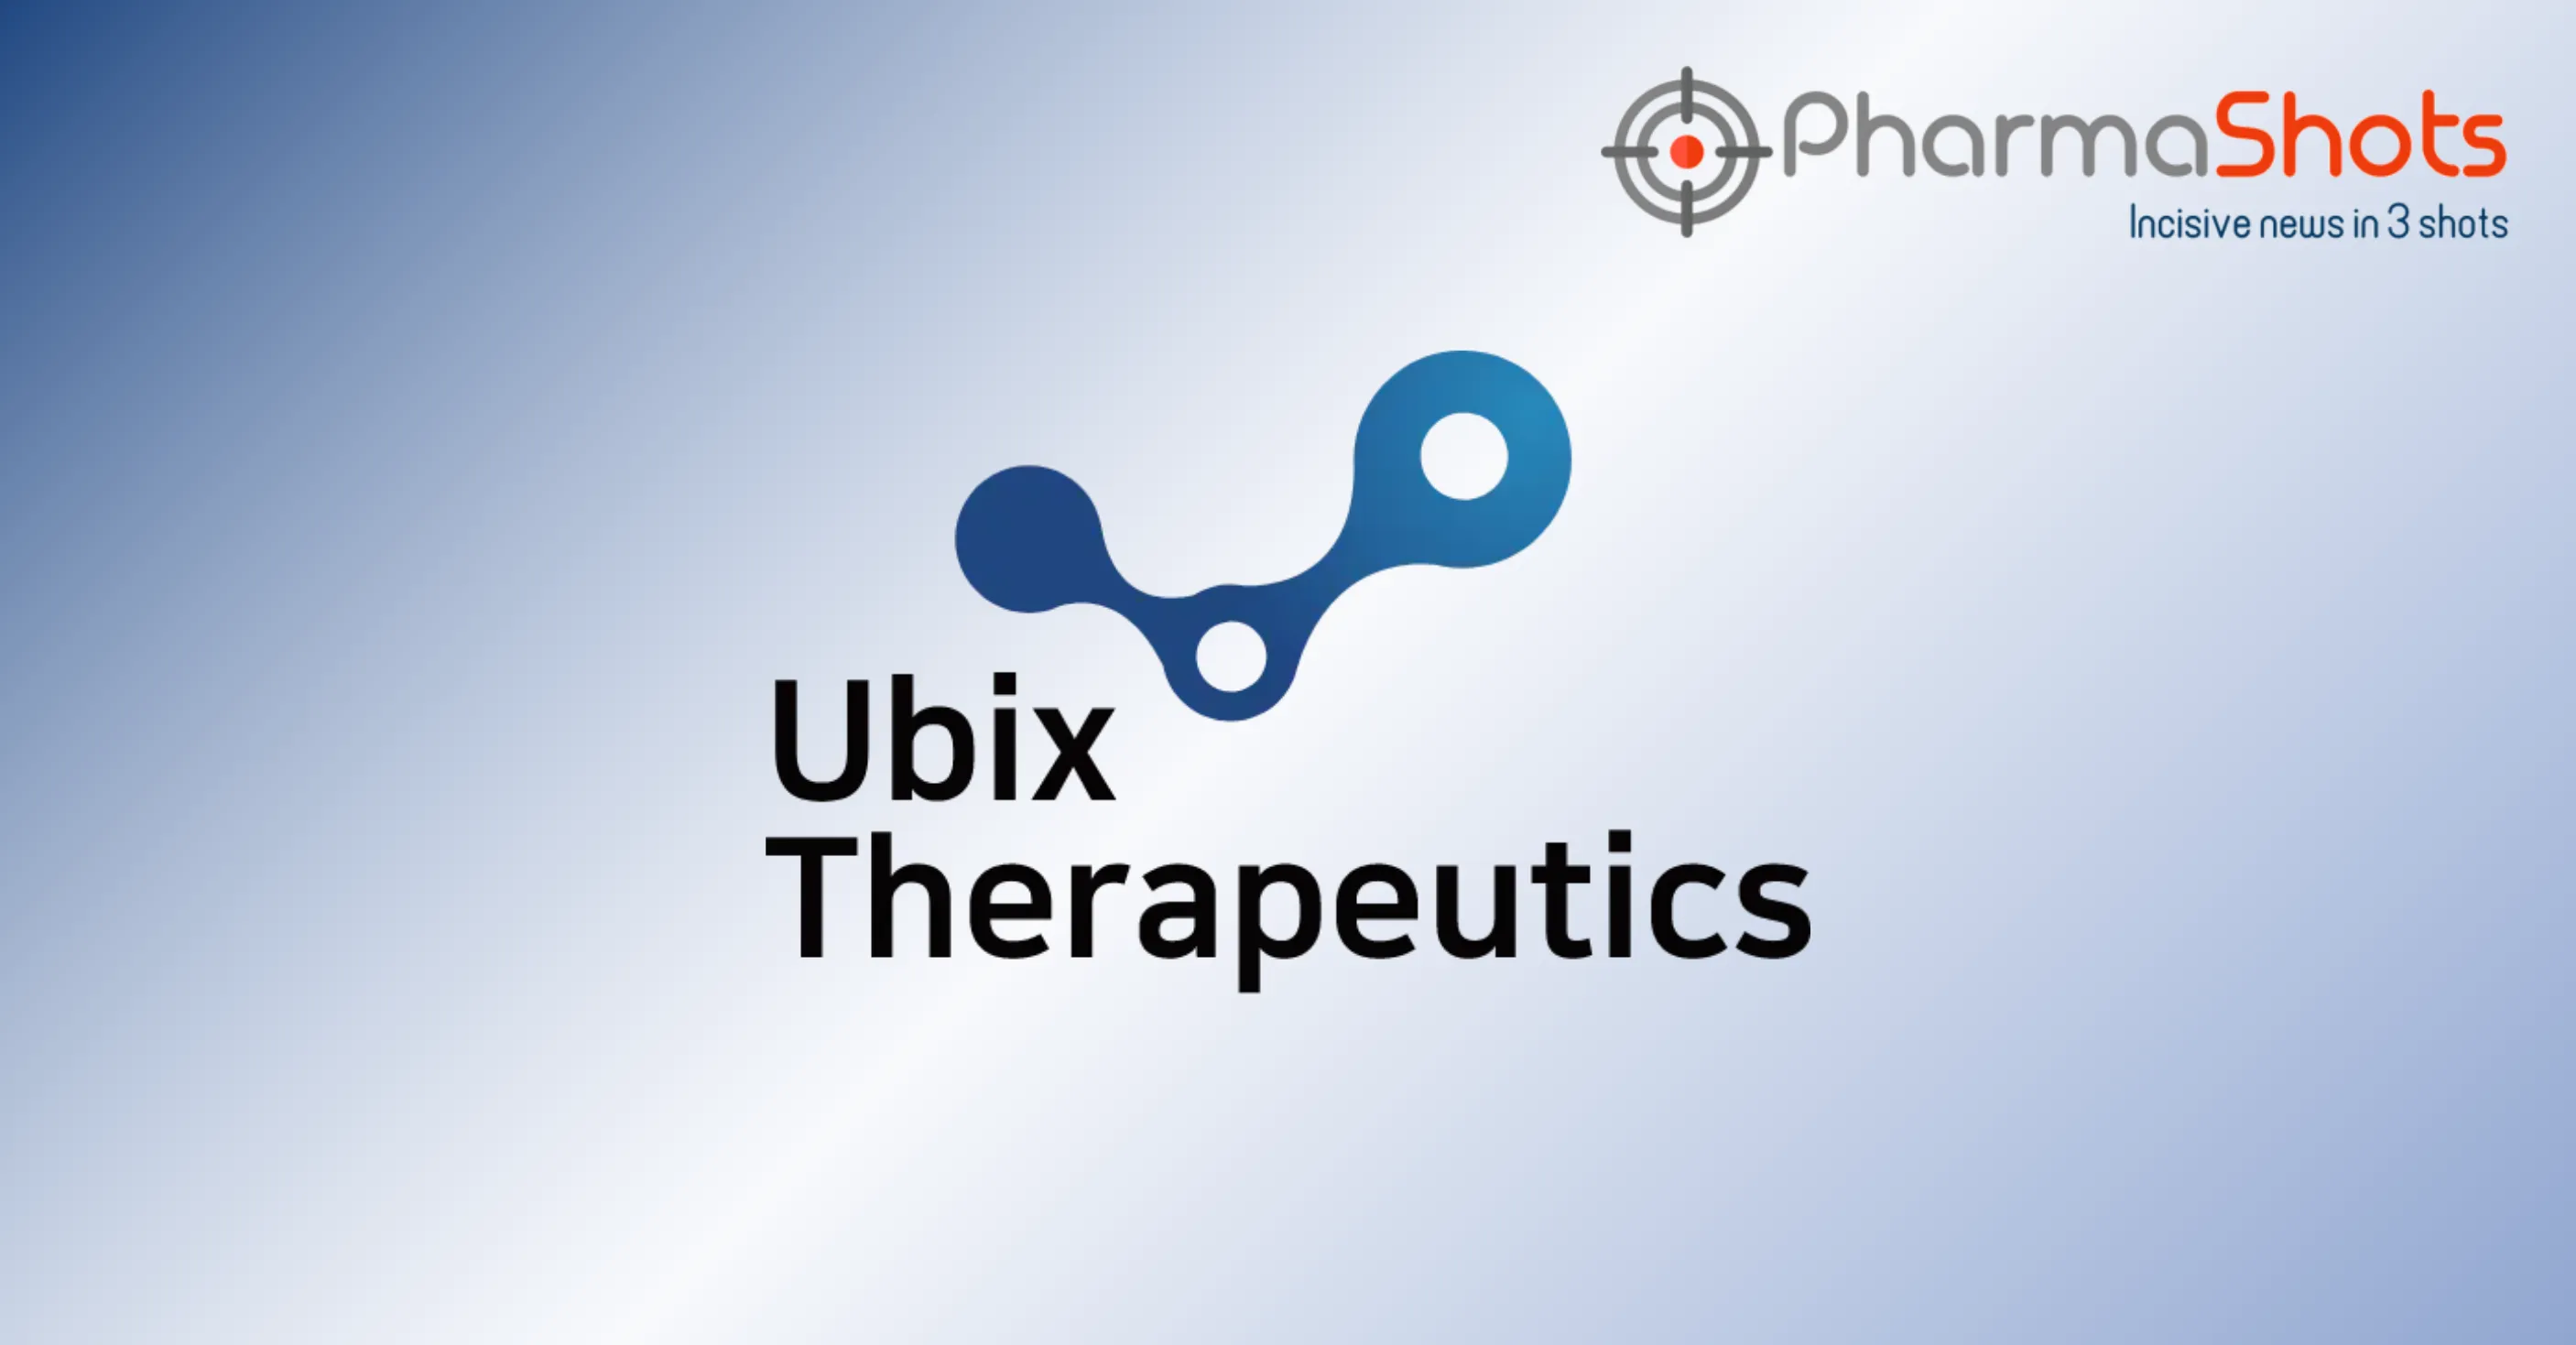 Ubix Therapeutics Collaborates with Yuhan to Develop UBX-103 for Treating Metastatic Castration Resistant Prostate Cancer